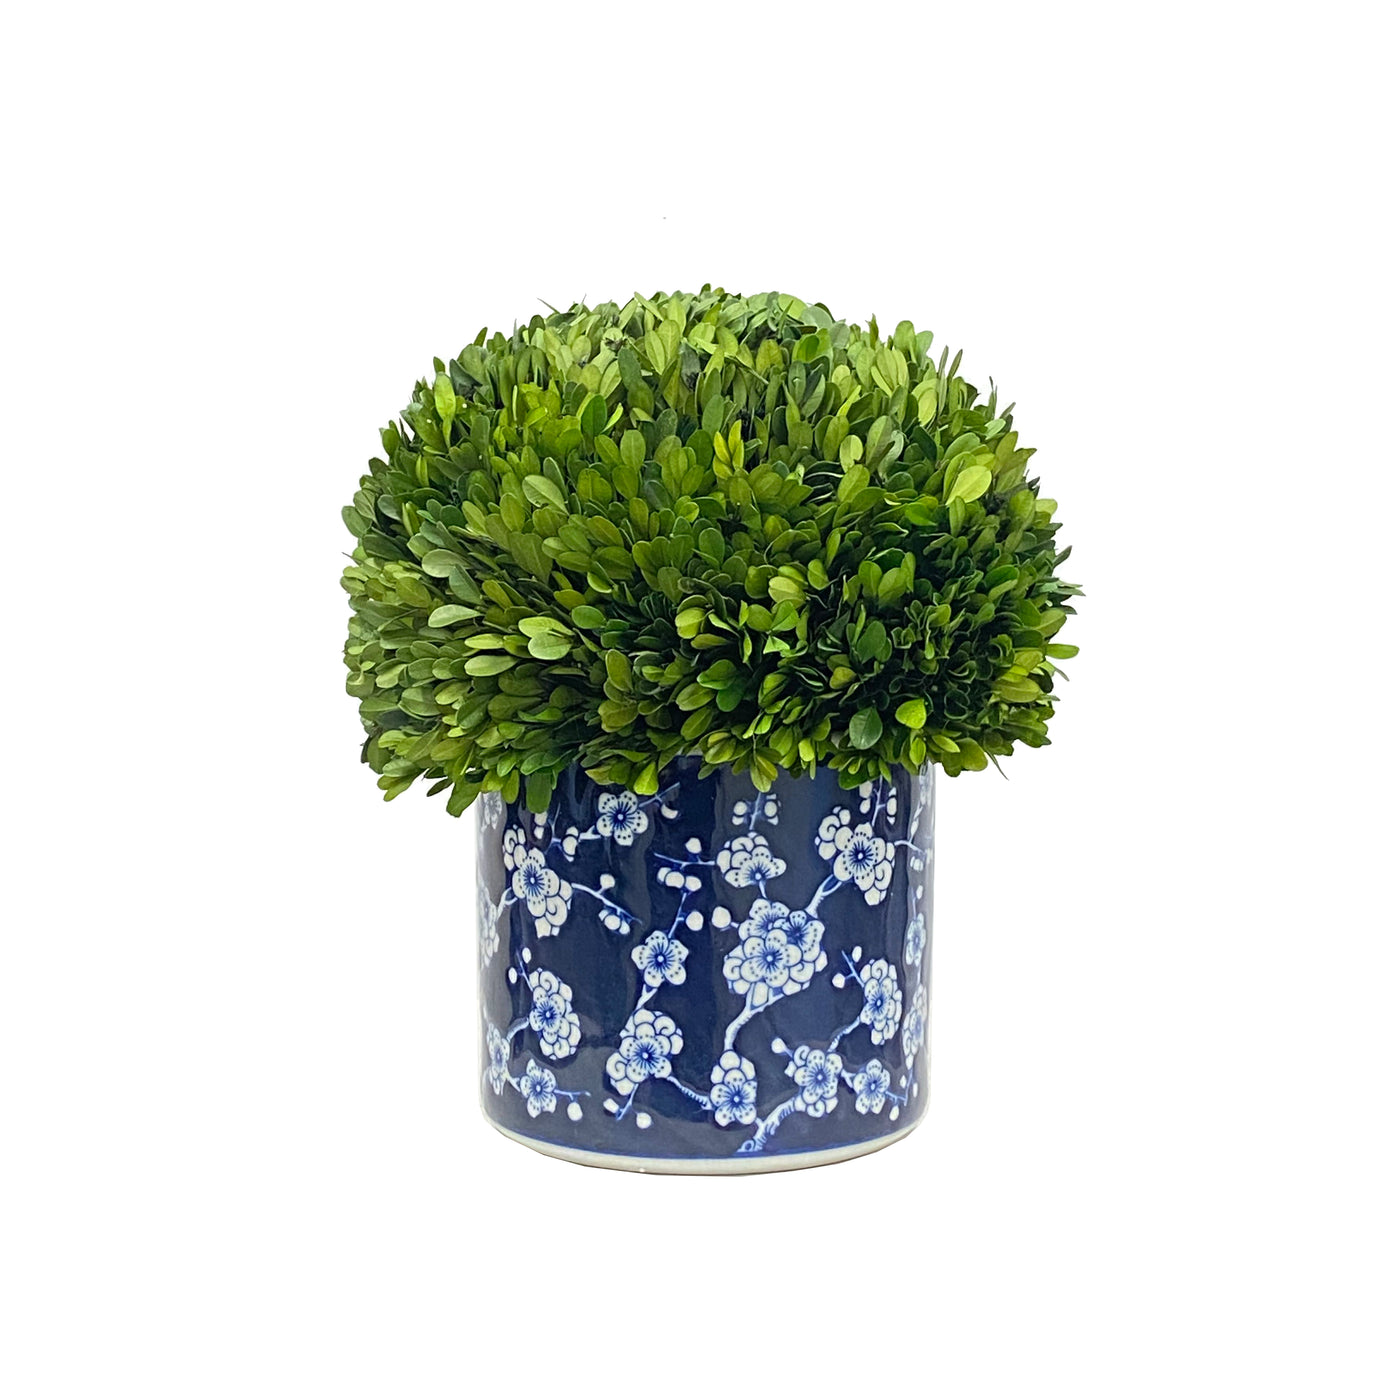 real preserved boxwood half in blue and white planter for tabletop floral decor